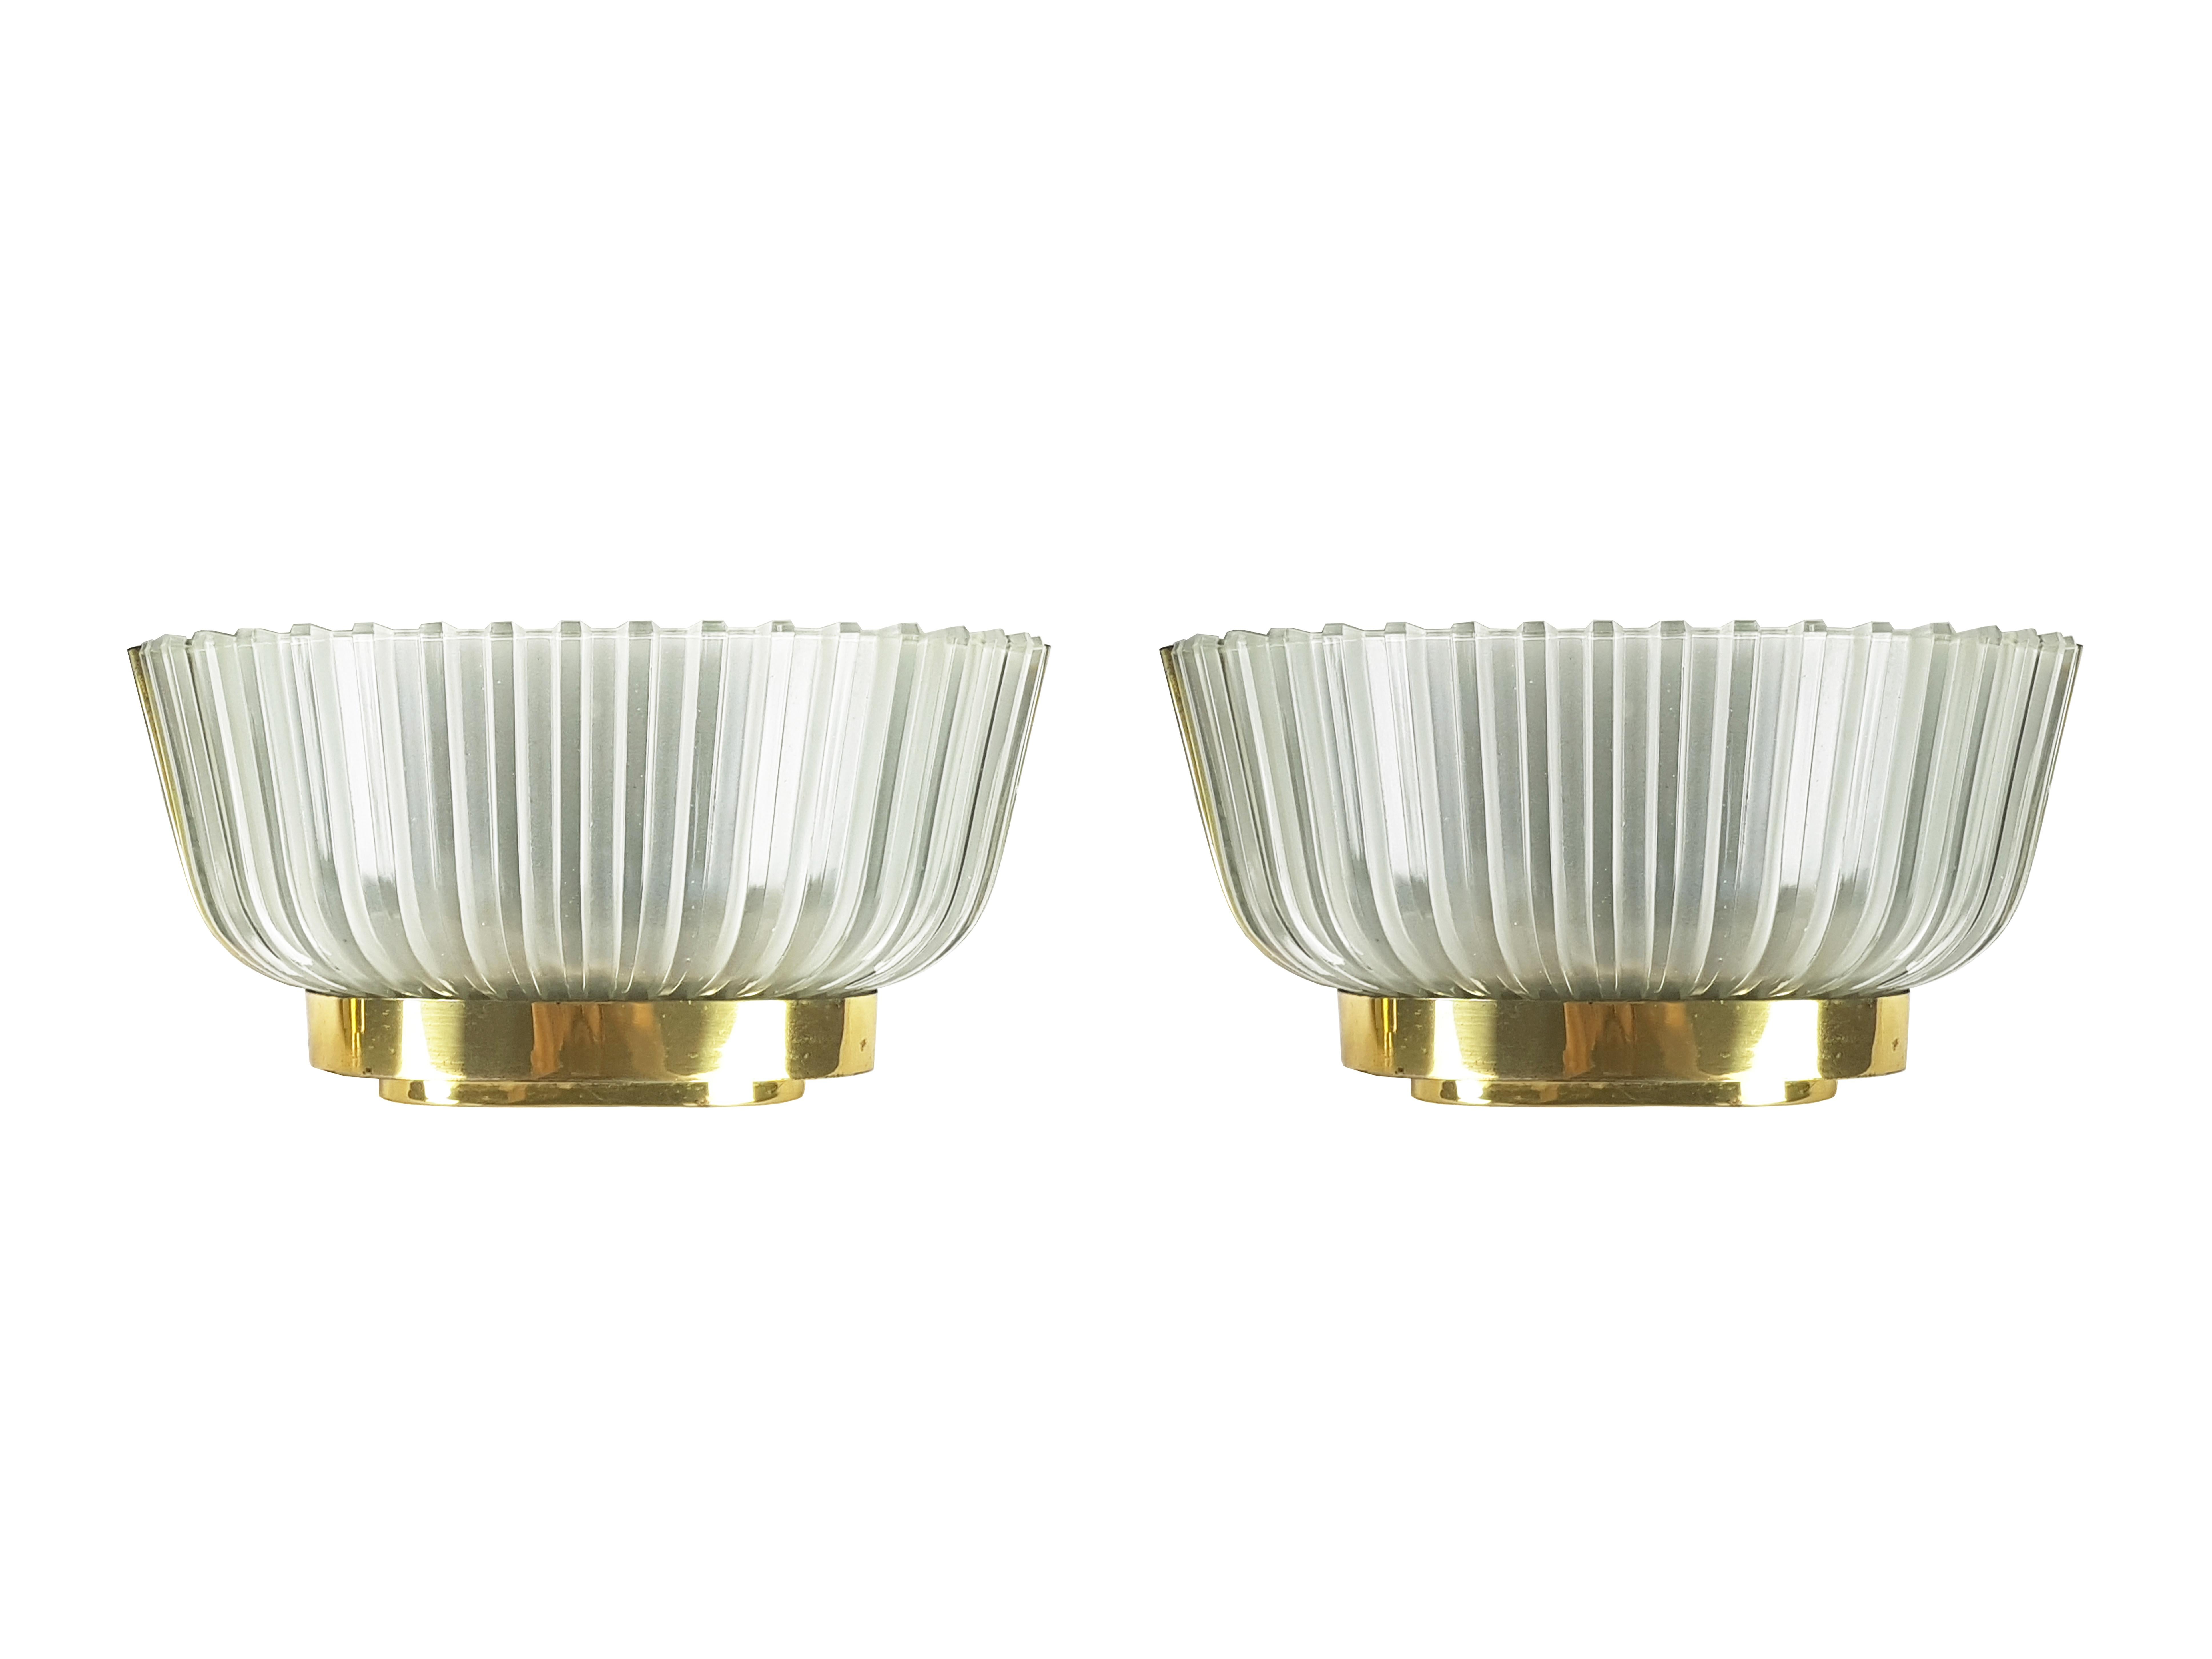 Art Deco Pair of Italian Midcentury Glass and Brass Sconces